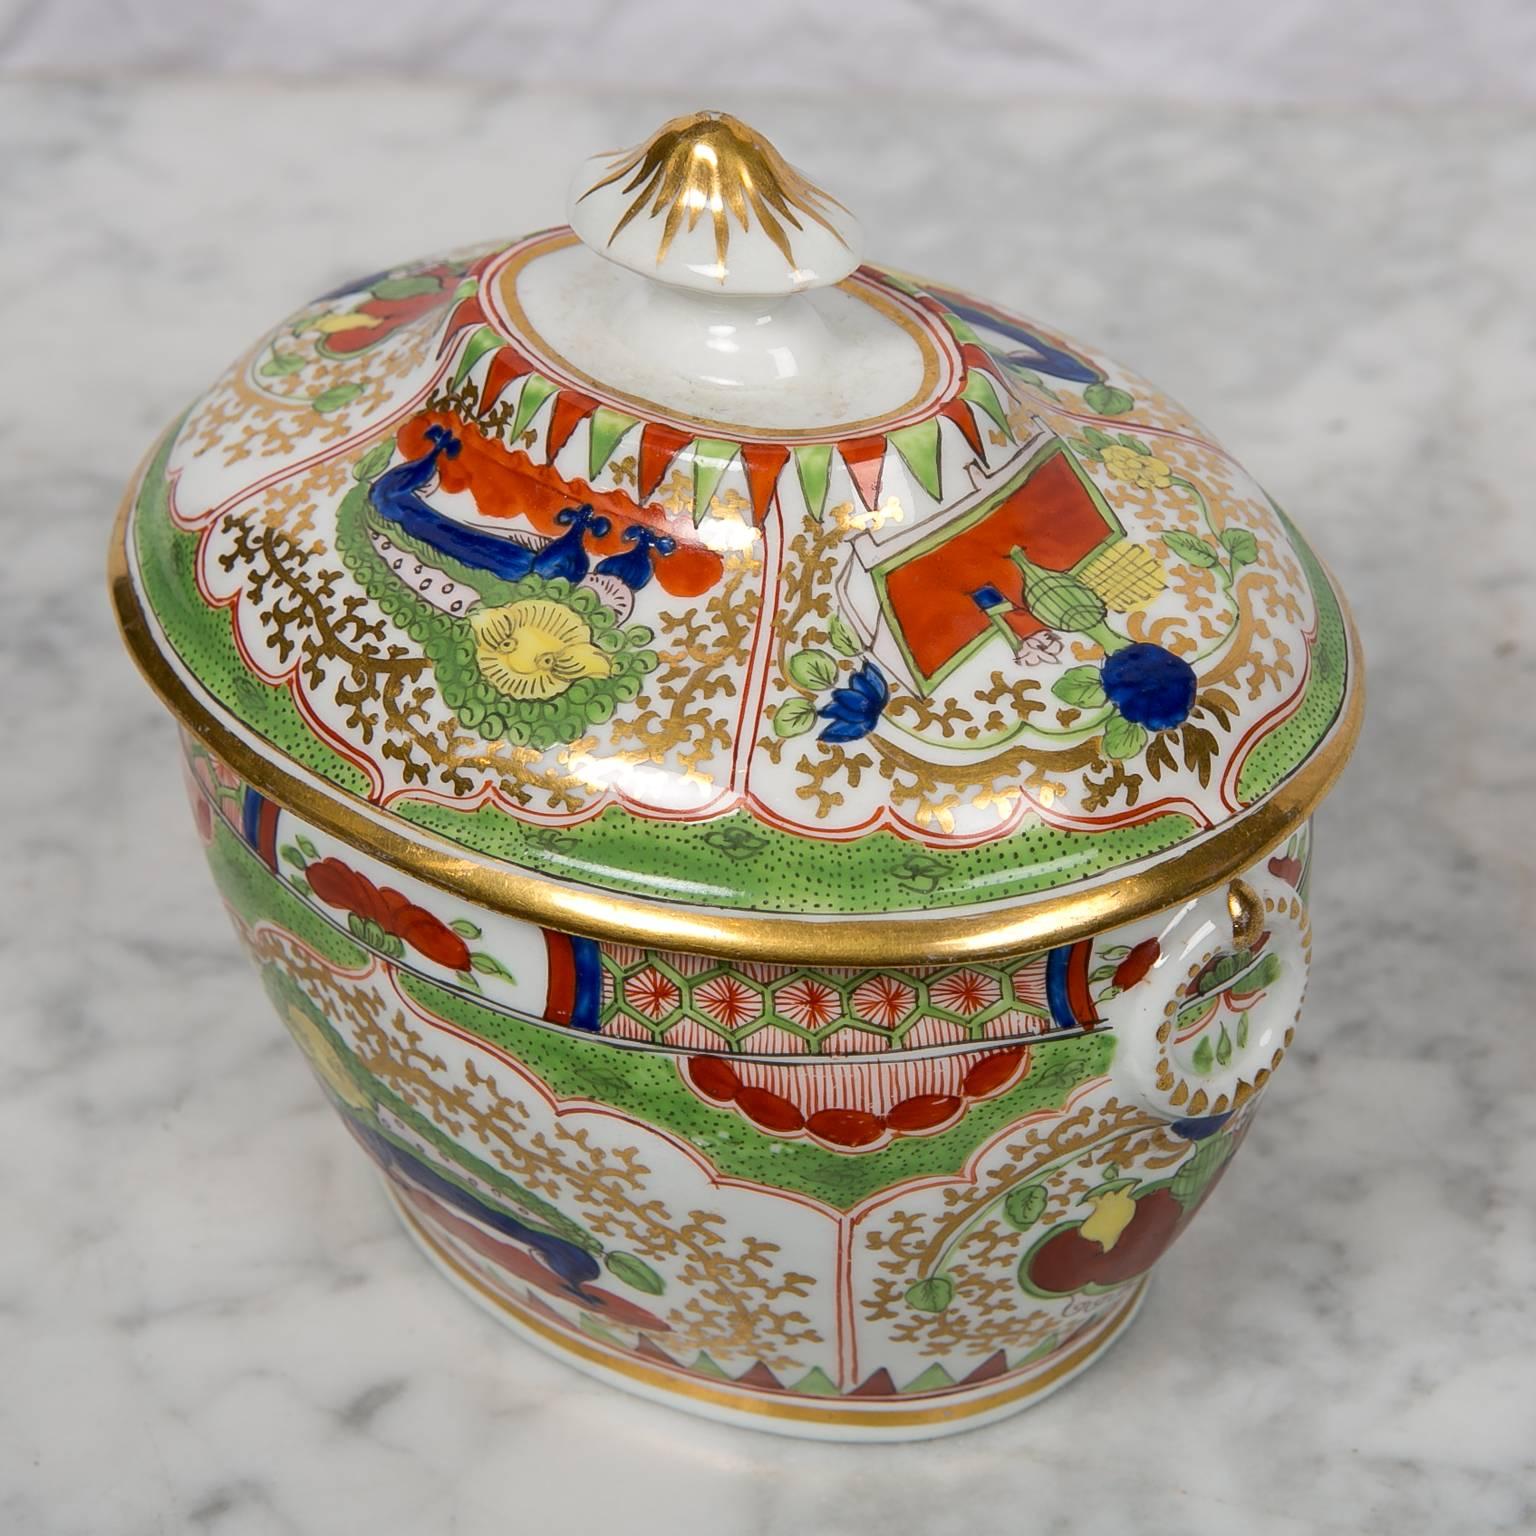 This antique sugar box made by Chamberlains Worcester in the Bengal tiger pattern is painted with lappet-shaped panels on each side showing a mythical beast. At each end of the sugar box is a panel showing objects of good fortune. The border is